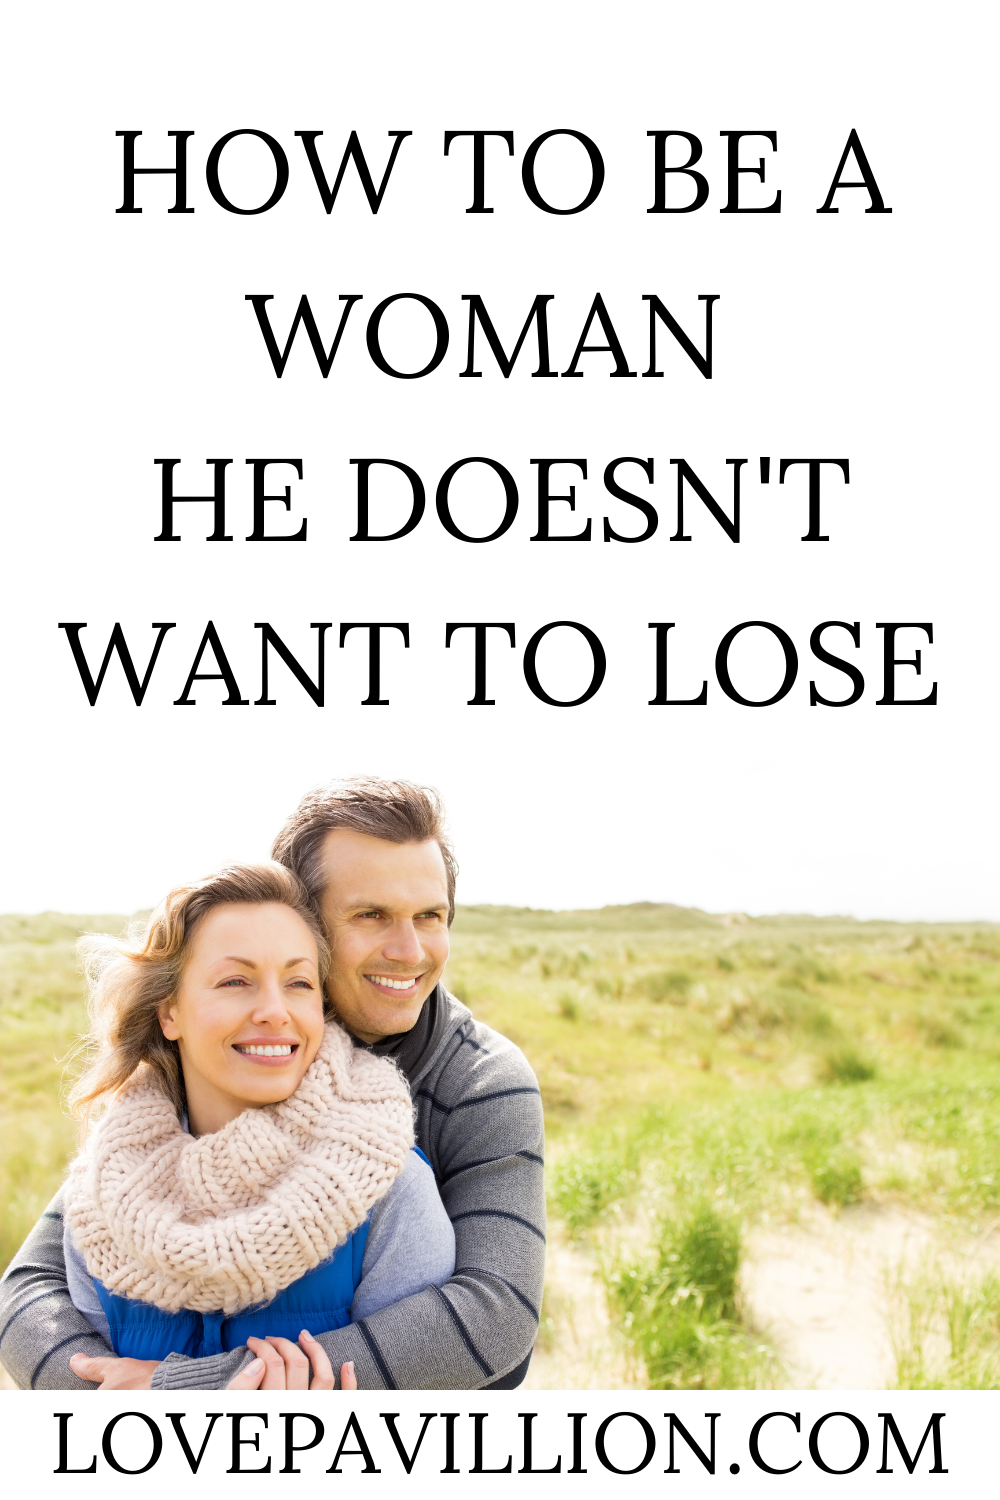 How To Be a Woman He Doesn’t Want to Lose